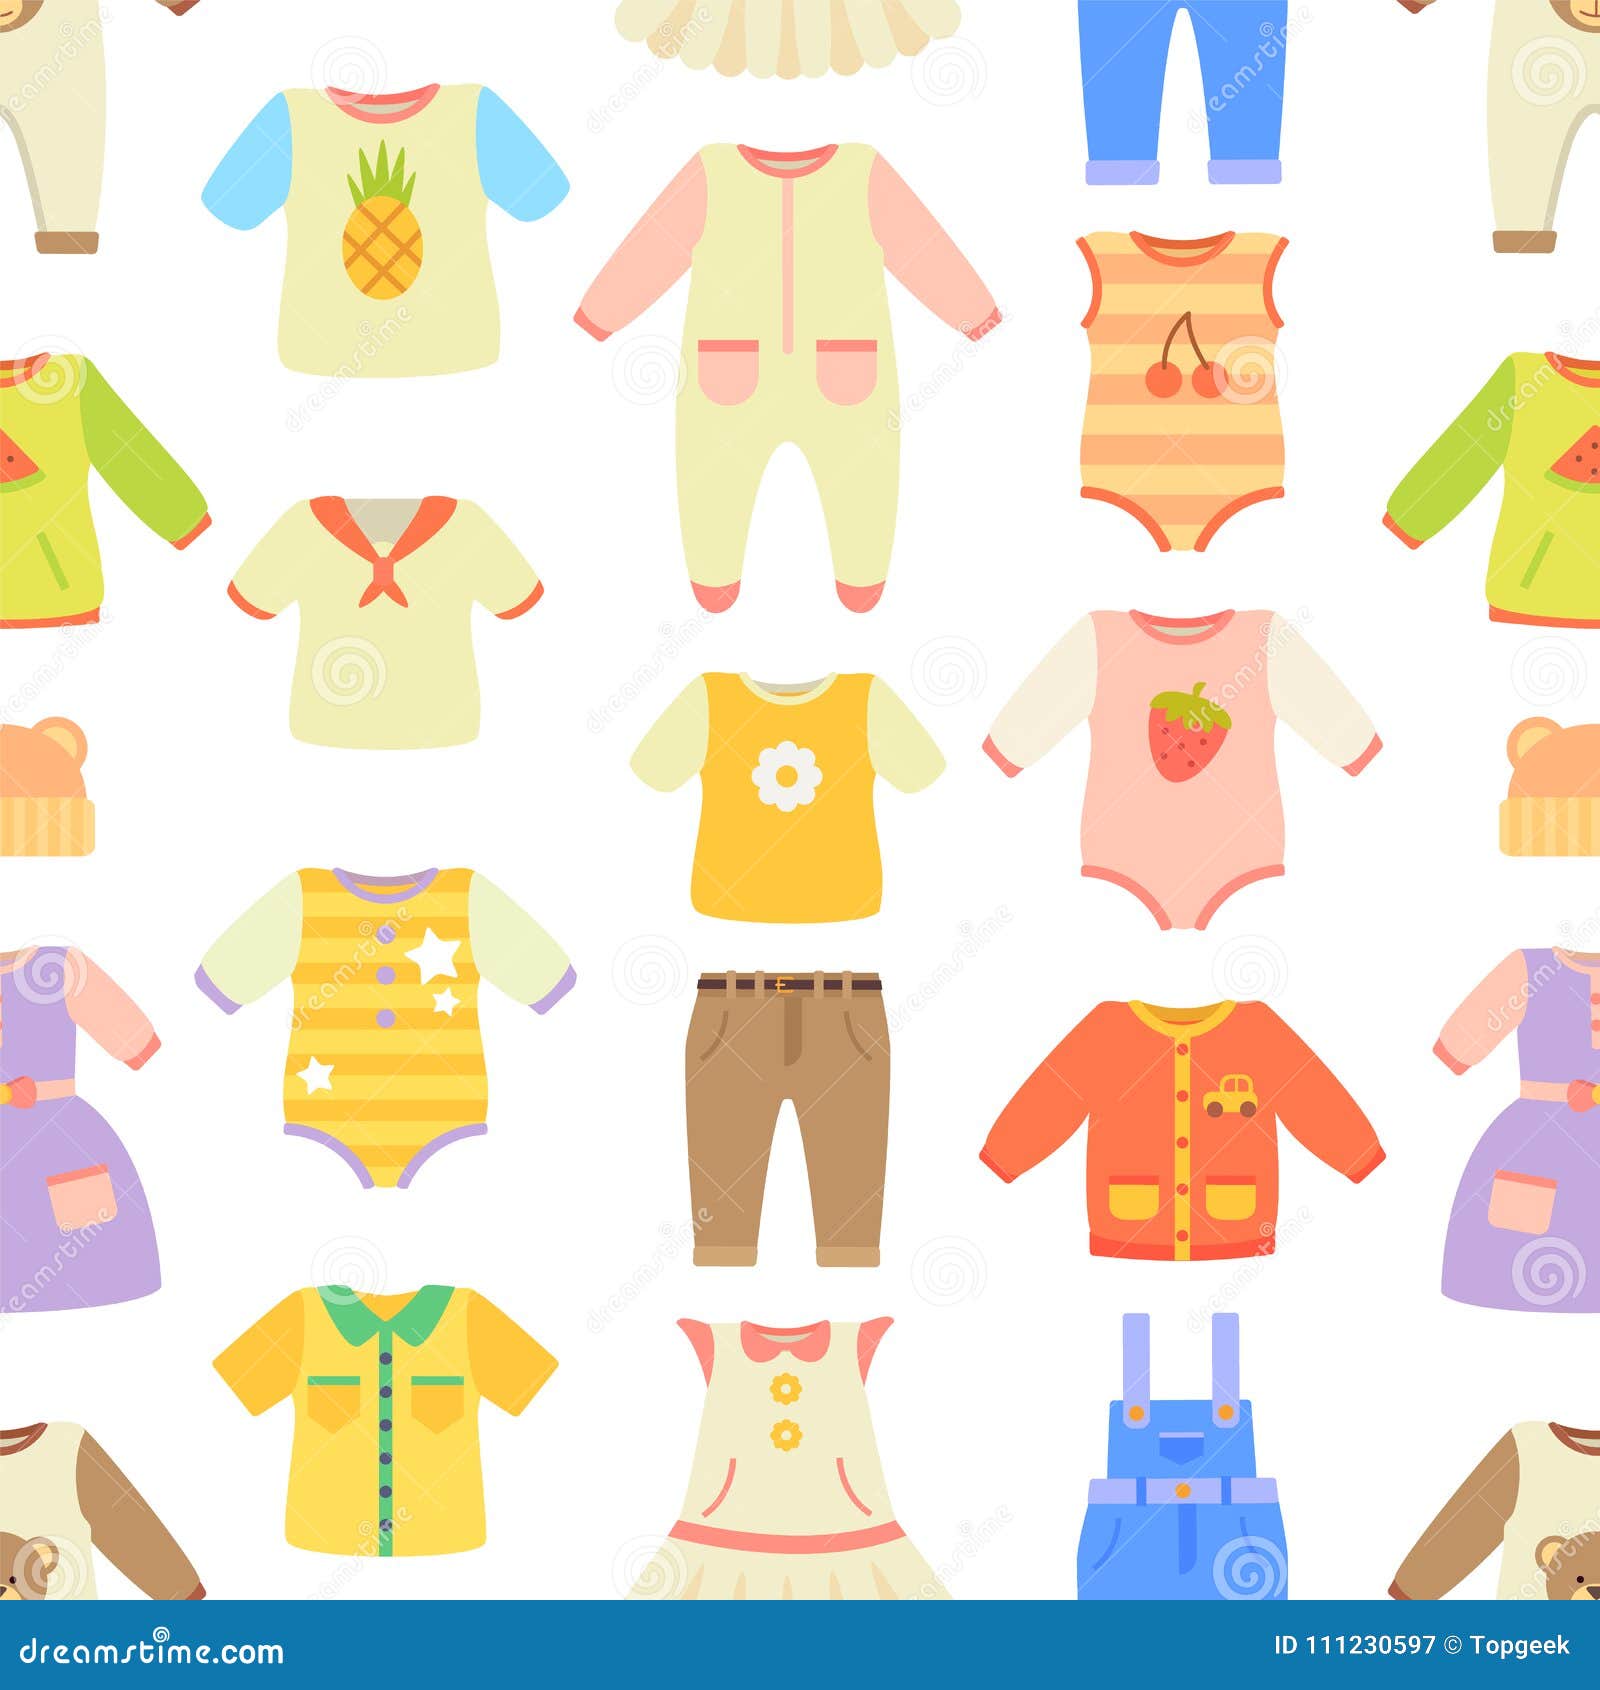 Baby Clothes Poster Pattern Vector Illustration Stock Vector ...